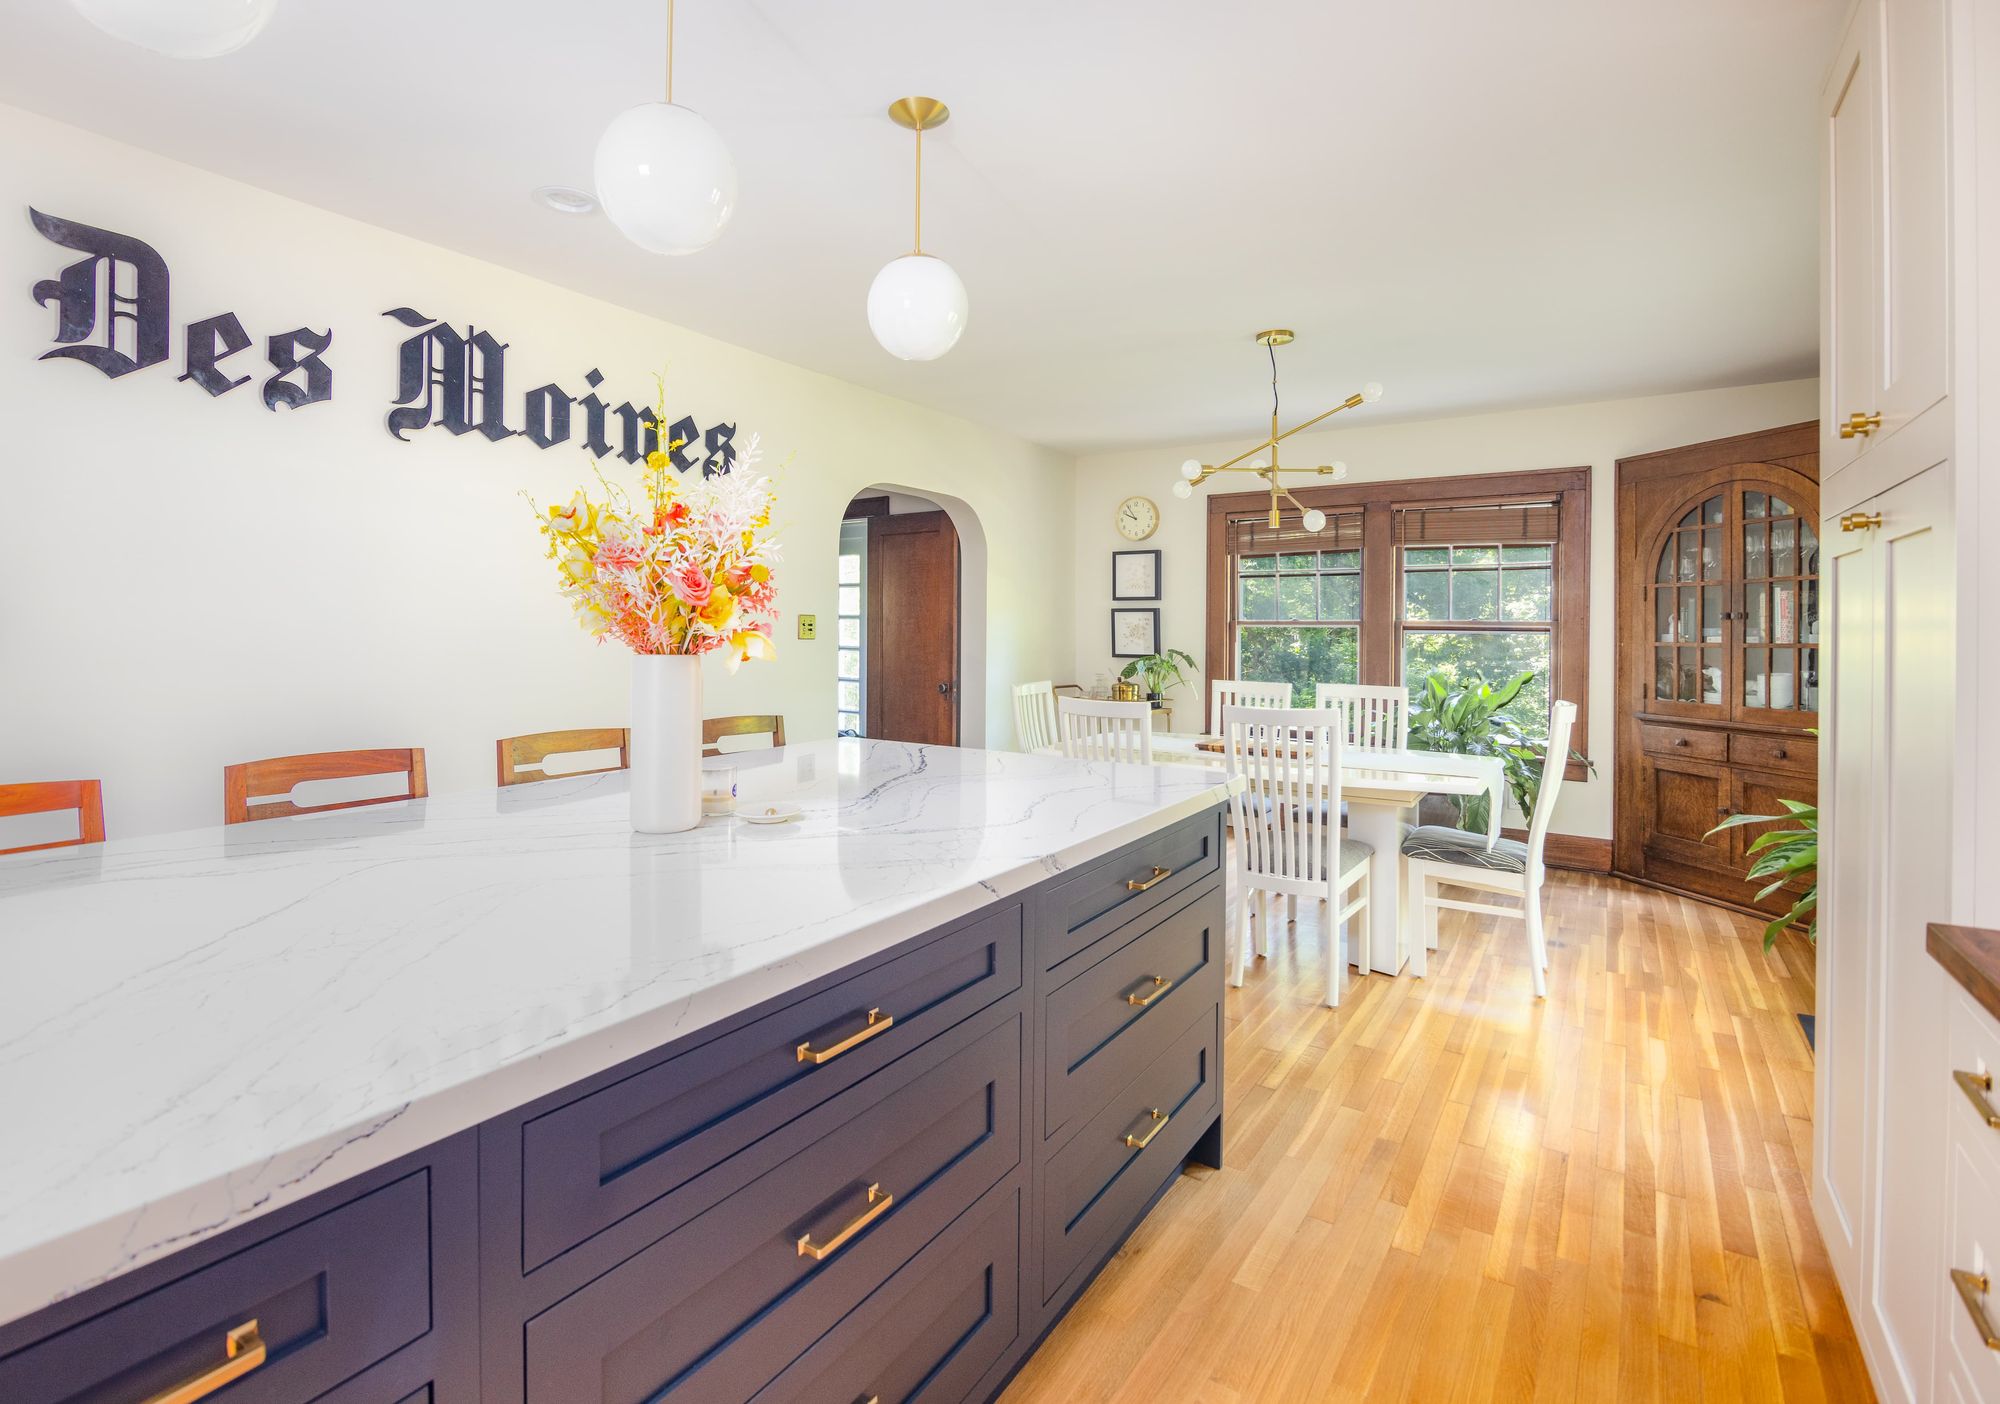 Abby & Colby | Eclectic Modern Kitchen & Bathroom Renovation in Des Moines